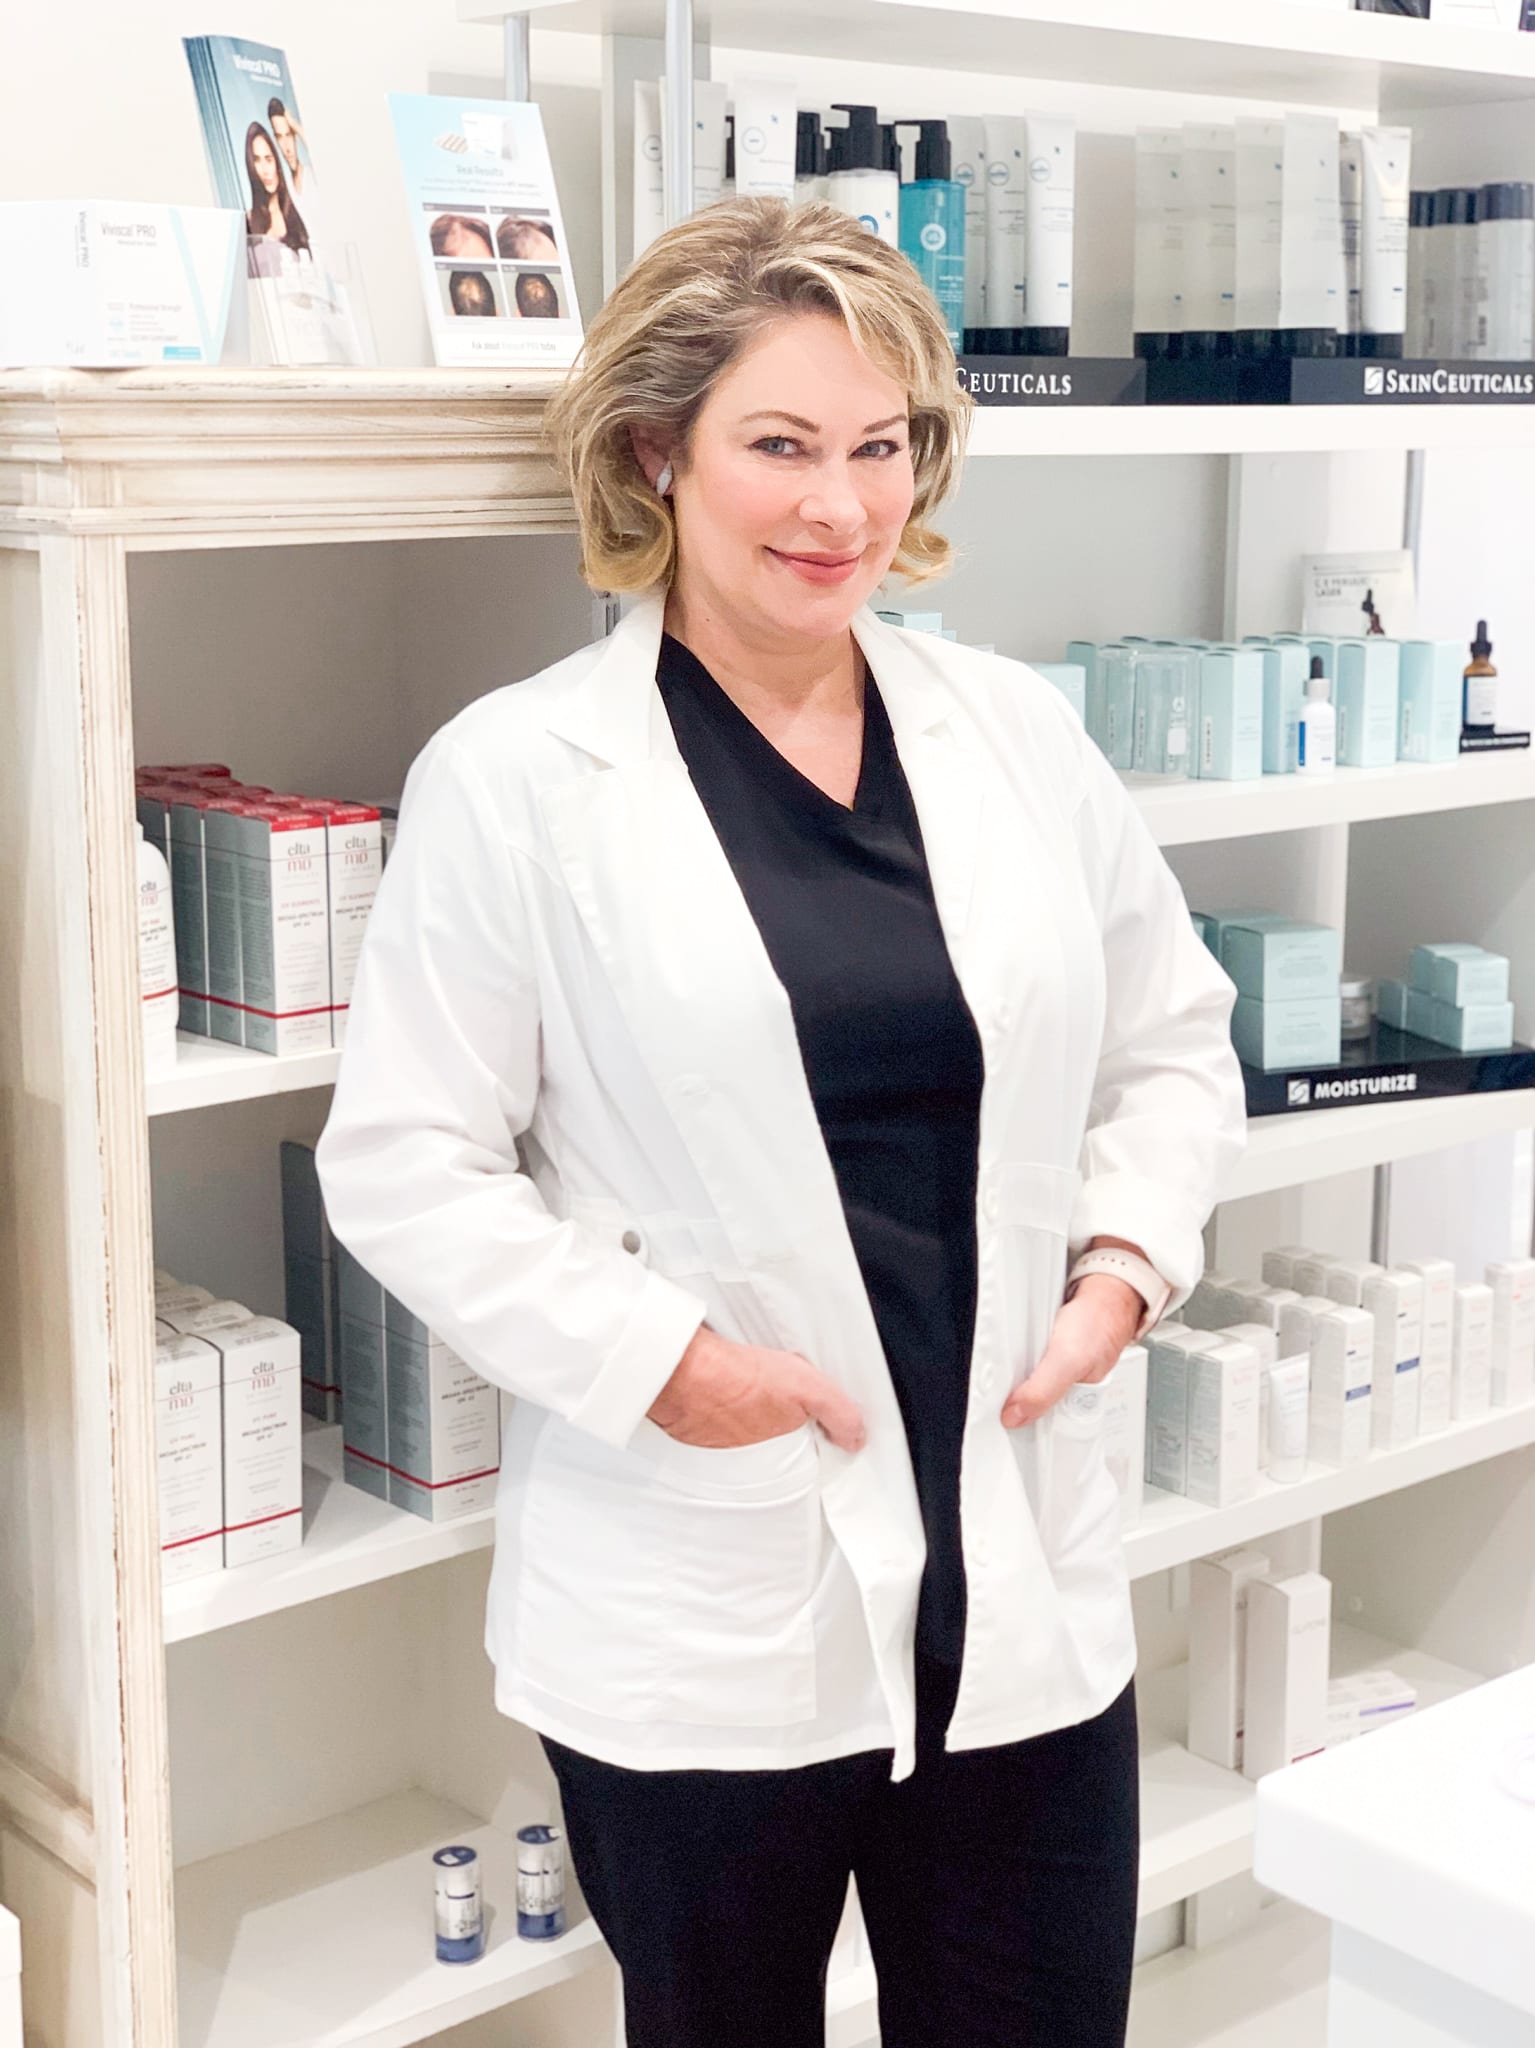 stacey expert advice page - Kattine Aesthetics services like coolsculpting, botox, facial filler, and more | Murfreesboro, TN